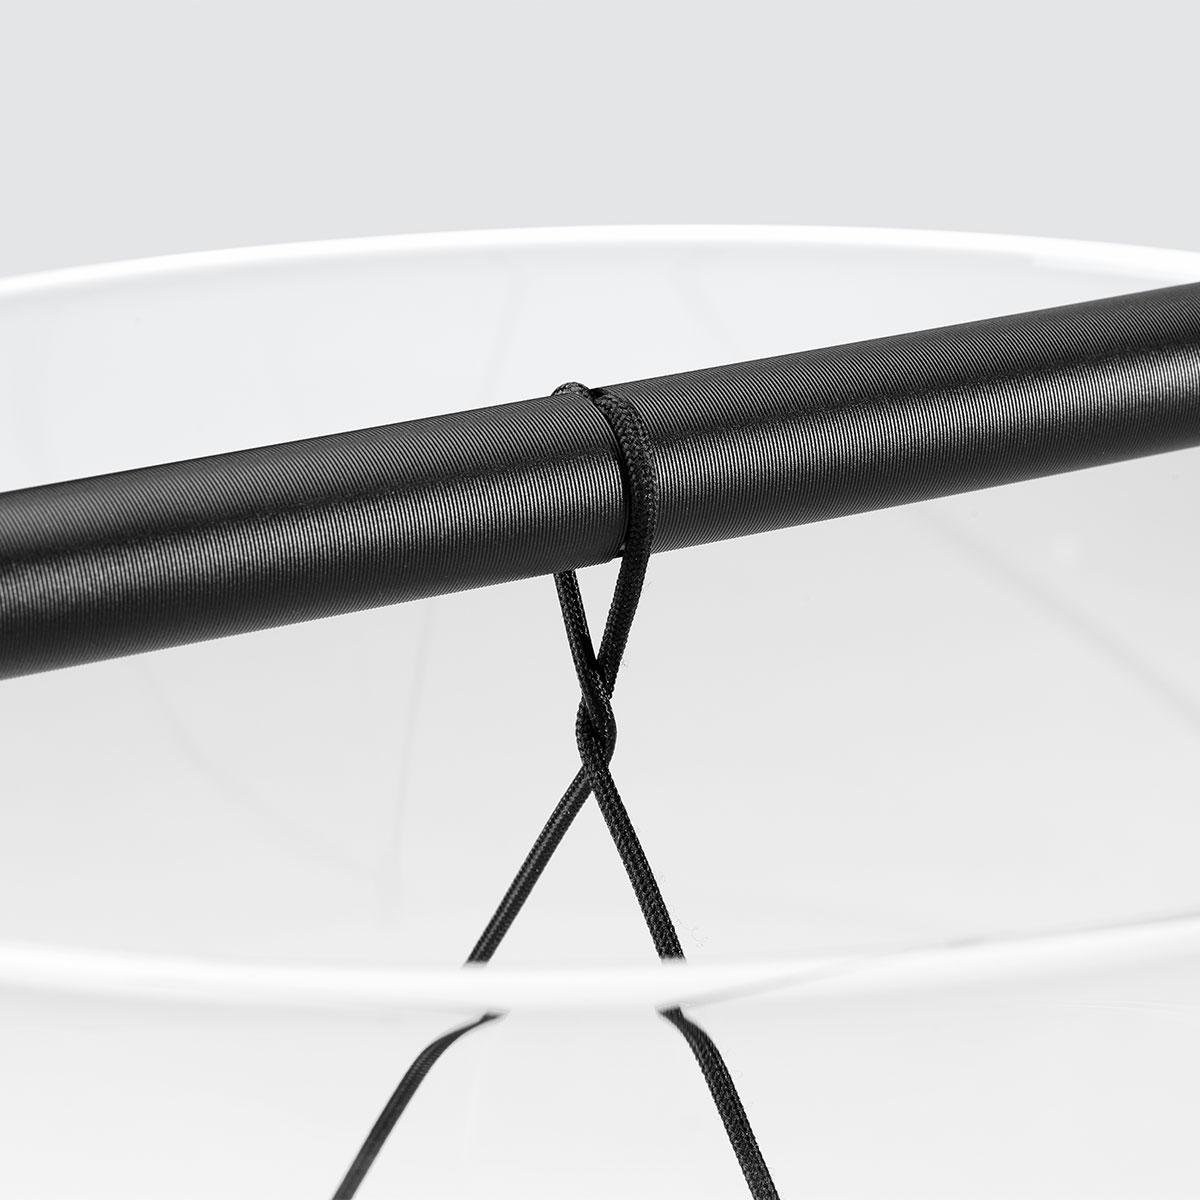 Flos To-Tie T2 Table Lamp in Anodized Black by Guglielmo Poletti In New Condition For Sale In Brooklyn, NY